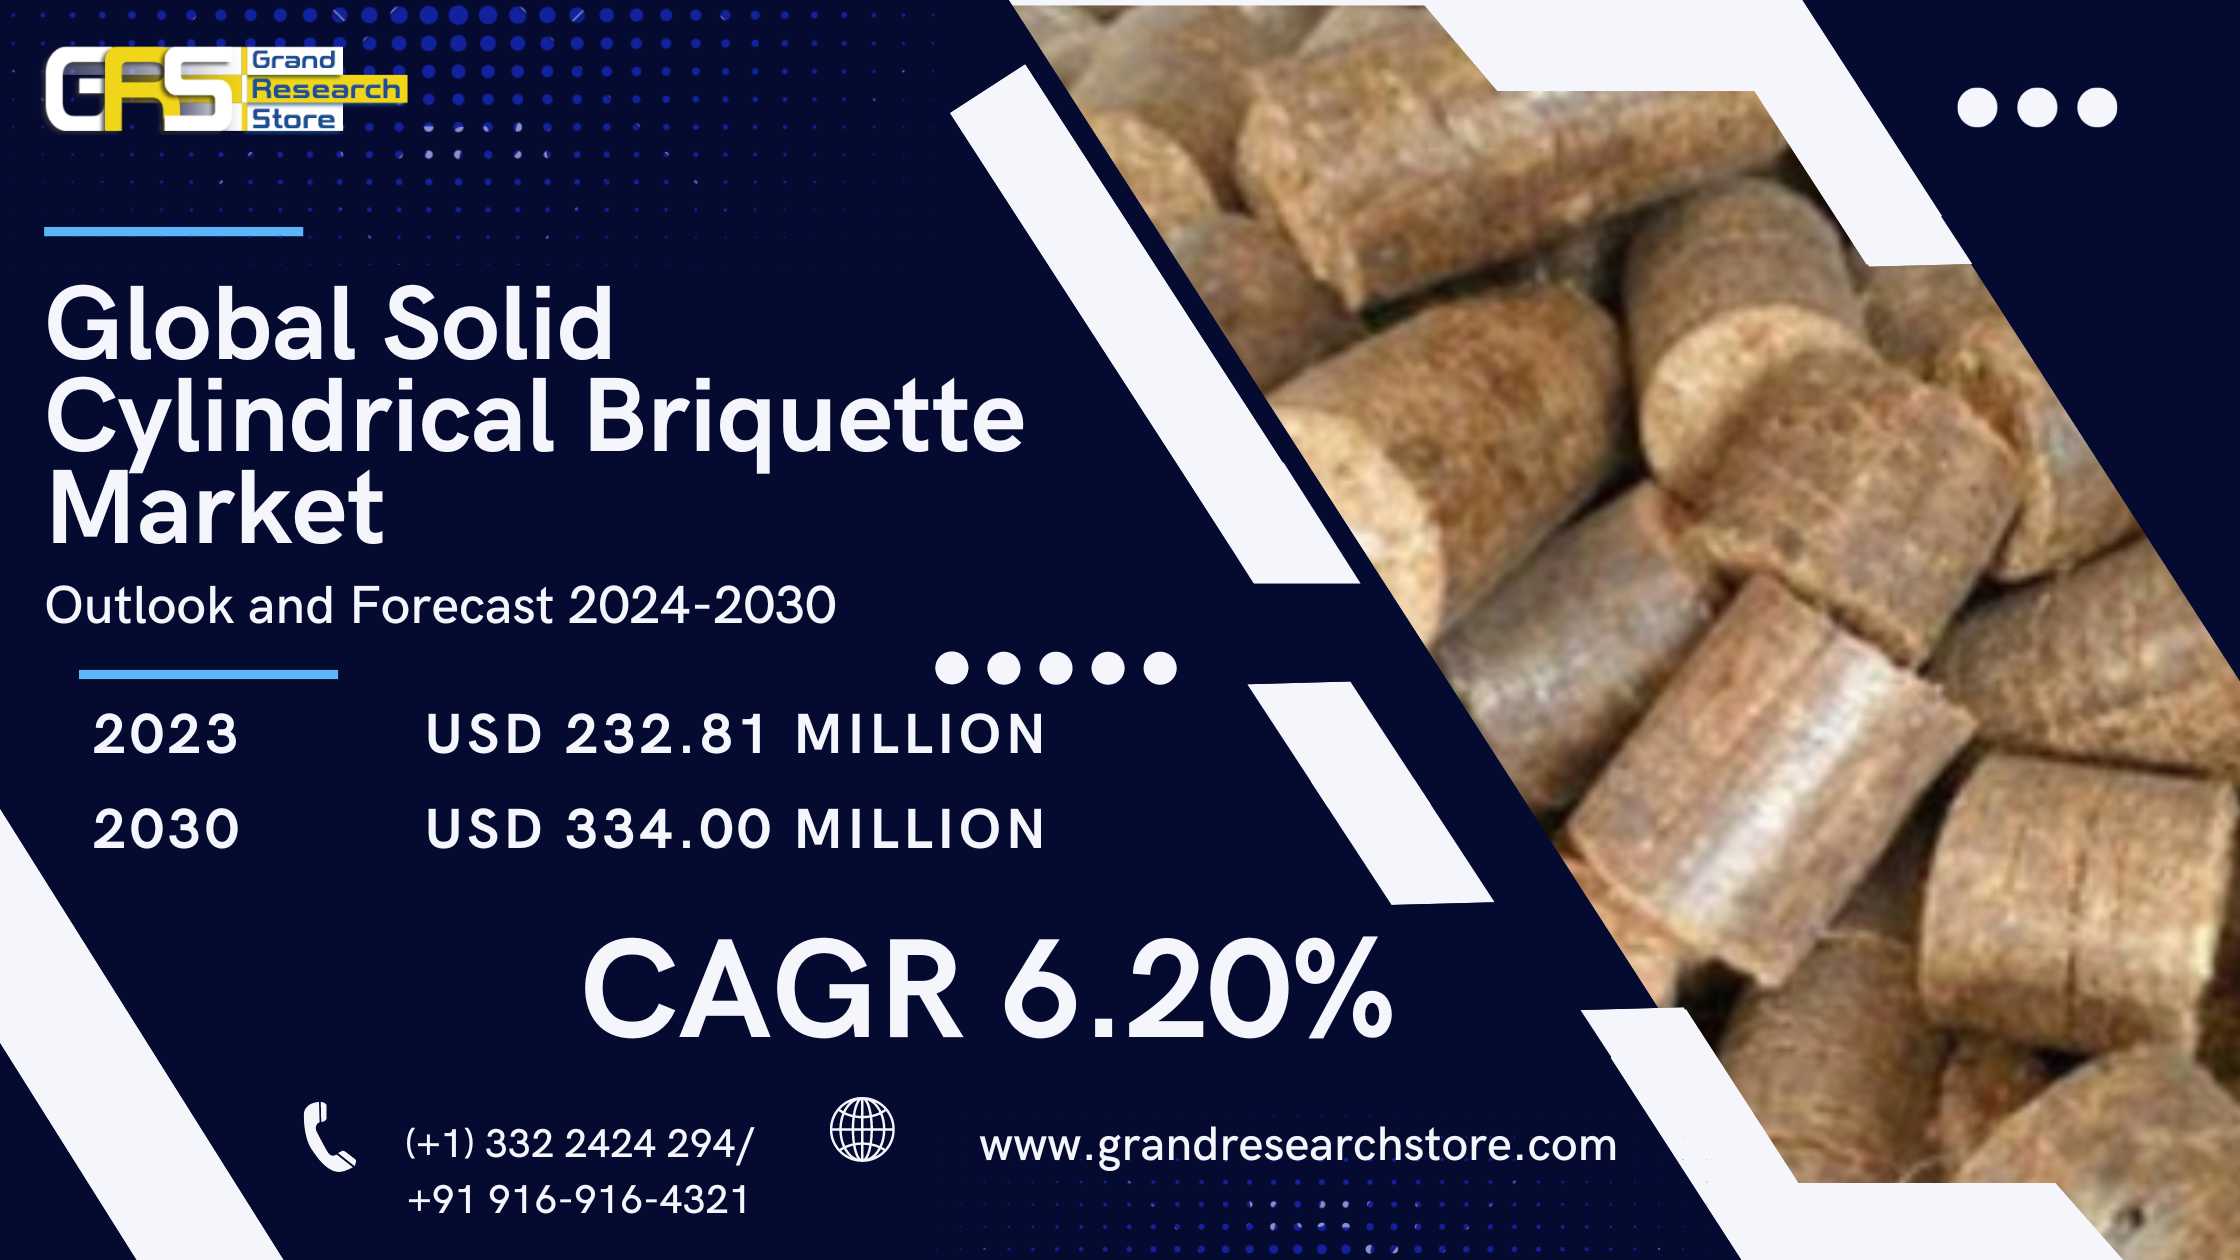 Global Solid Cylindrical Briquette Market Research..